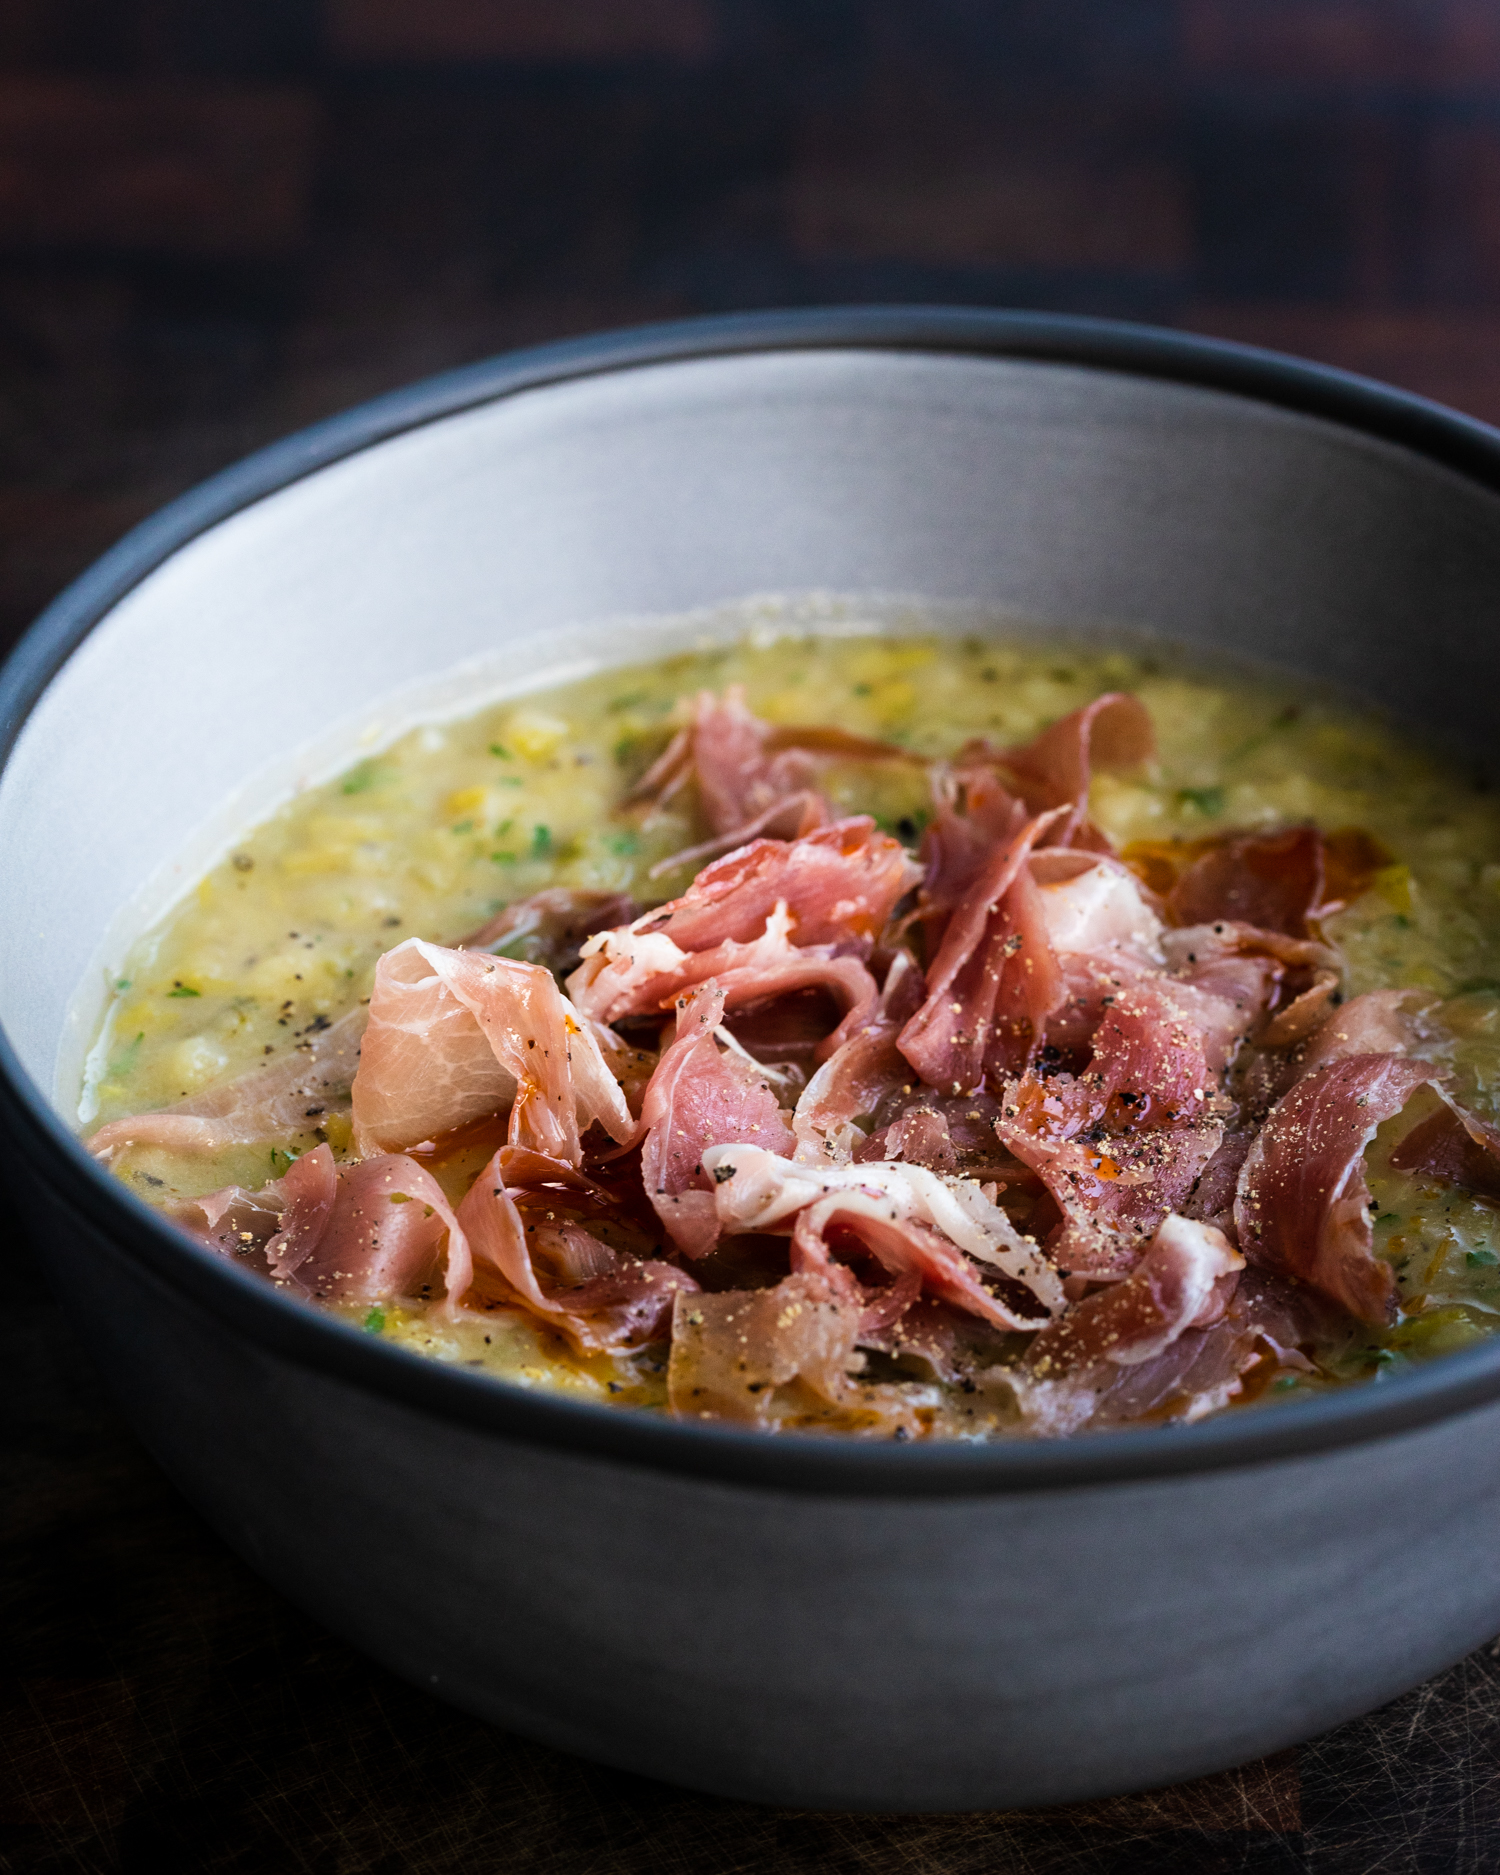 Leek and potato soup with no cream and serrano ham in a grey bowl on a wooden background